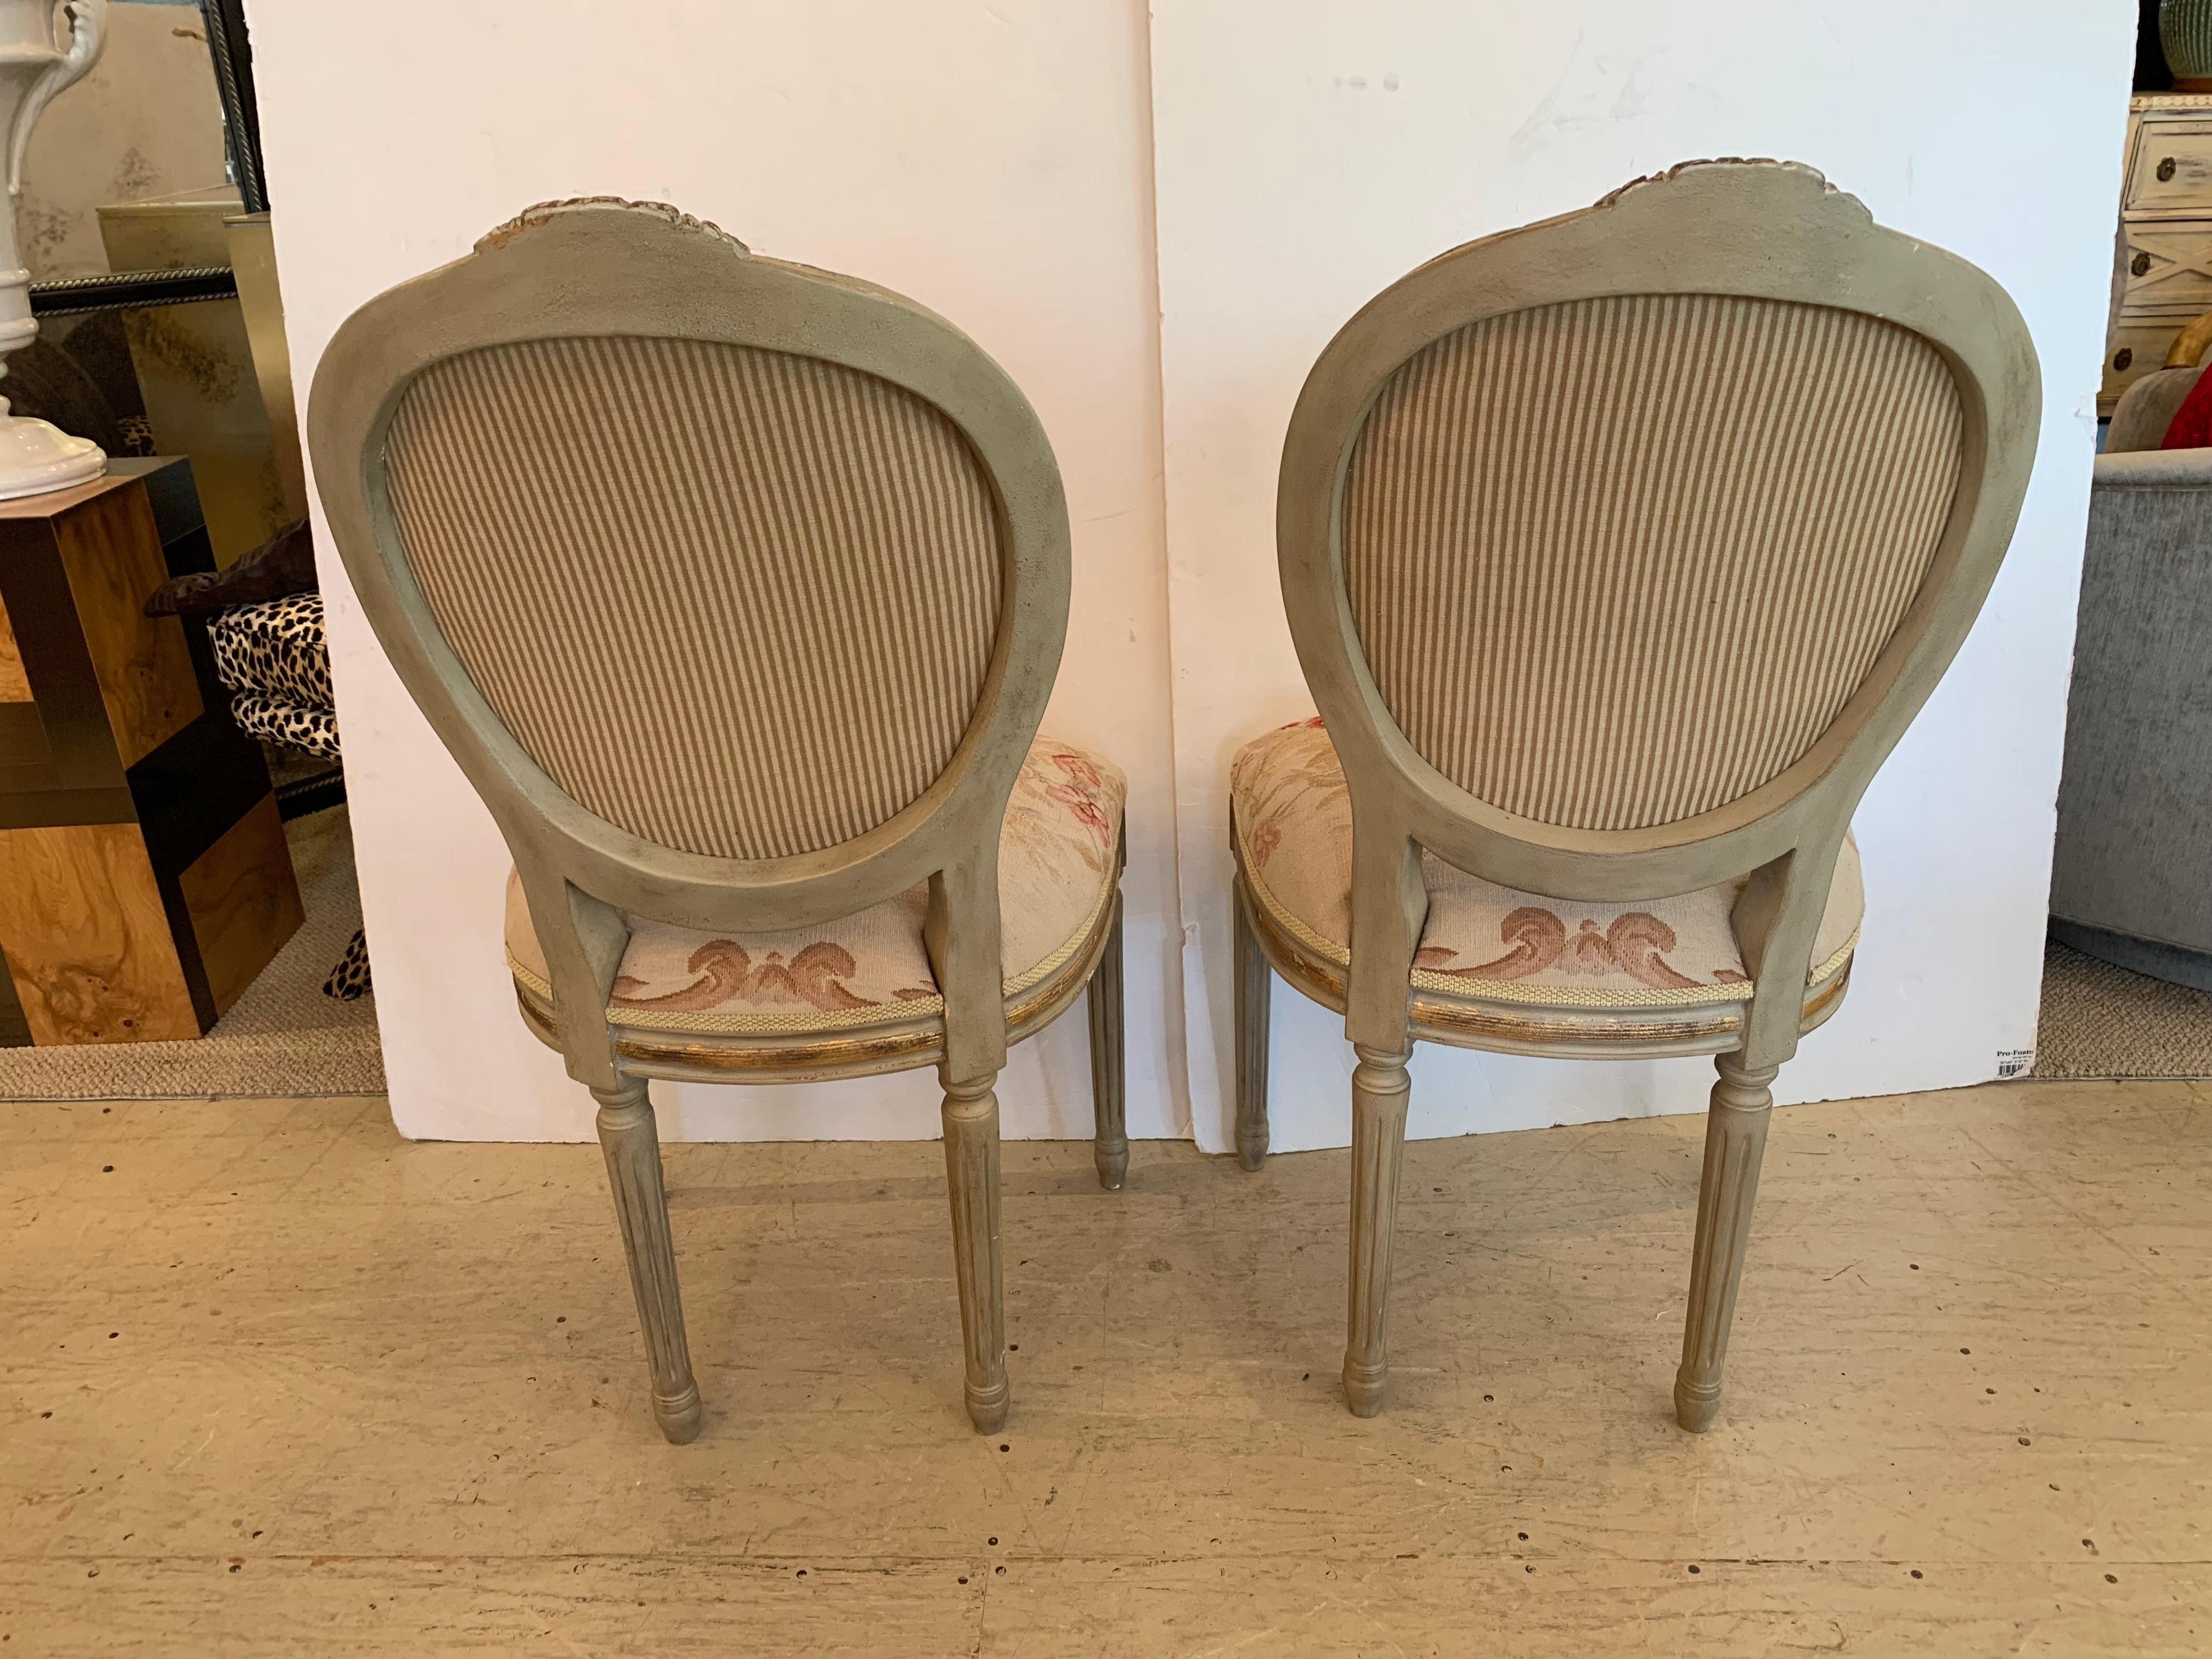 A very pretty pair of Louis XVI style oval back fauteuils or side chairs from French Market, having lovely painted and gilded wood frames in soft light green, upholstered in a soft pastel wool and silk petit point upholstery, and a lovely window